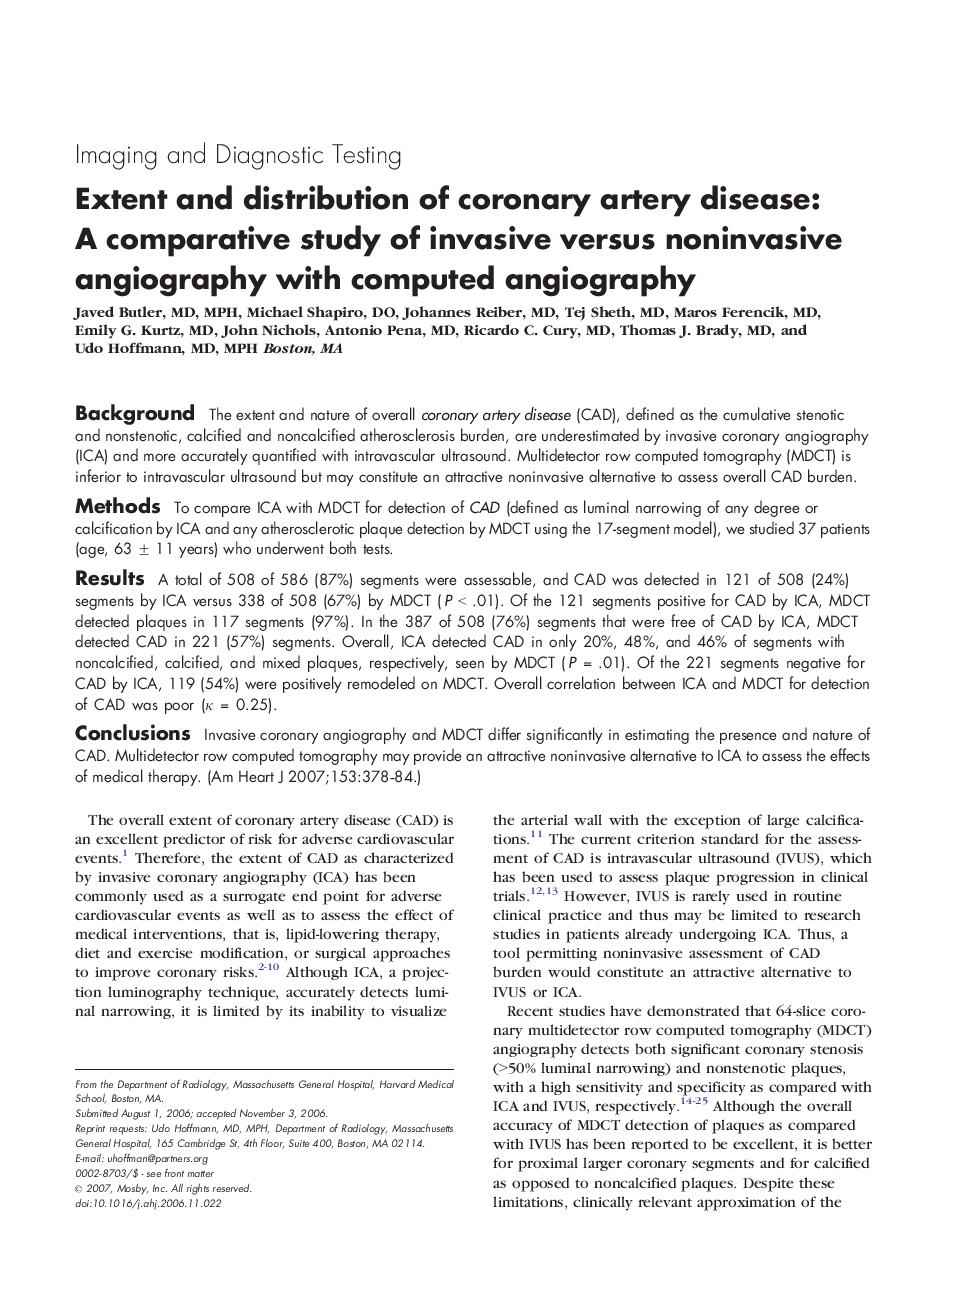 Extent and distribution of coronary artery disease: A comparative study of invasive versus noninvasive angiography with computed angiography